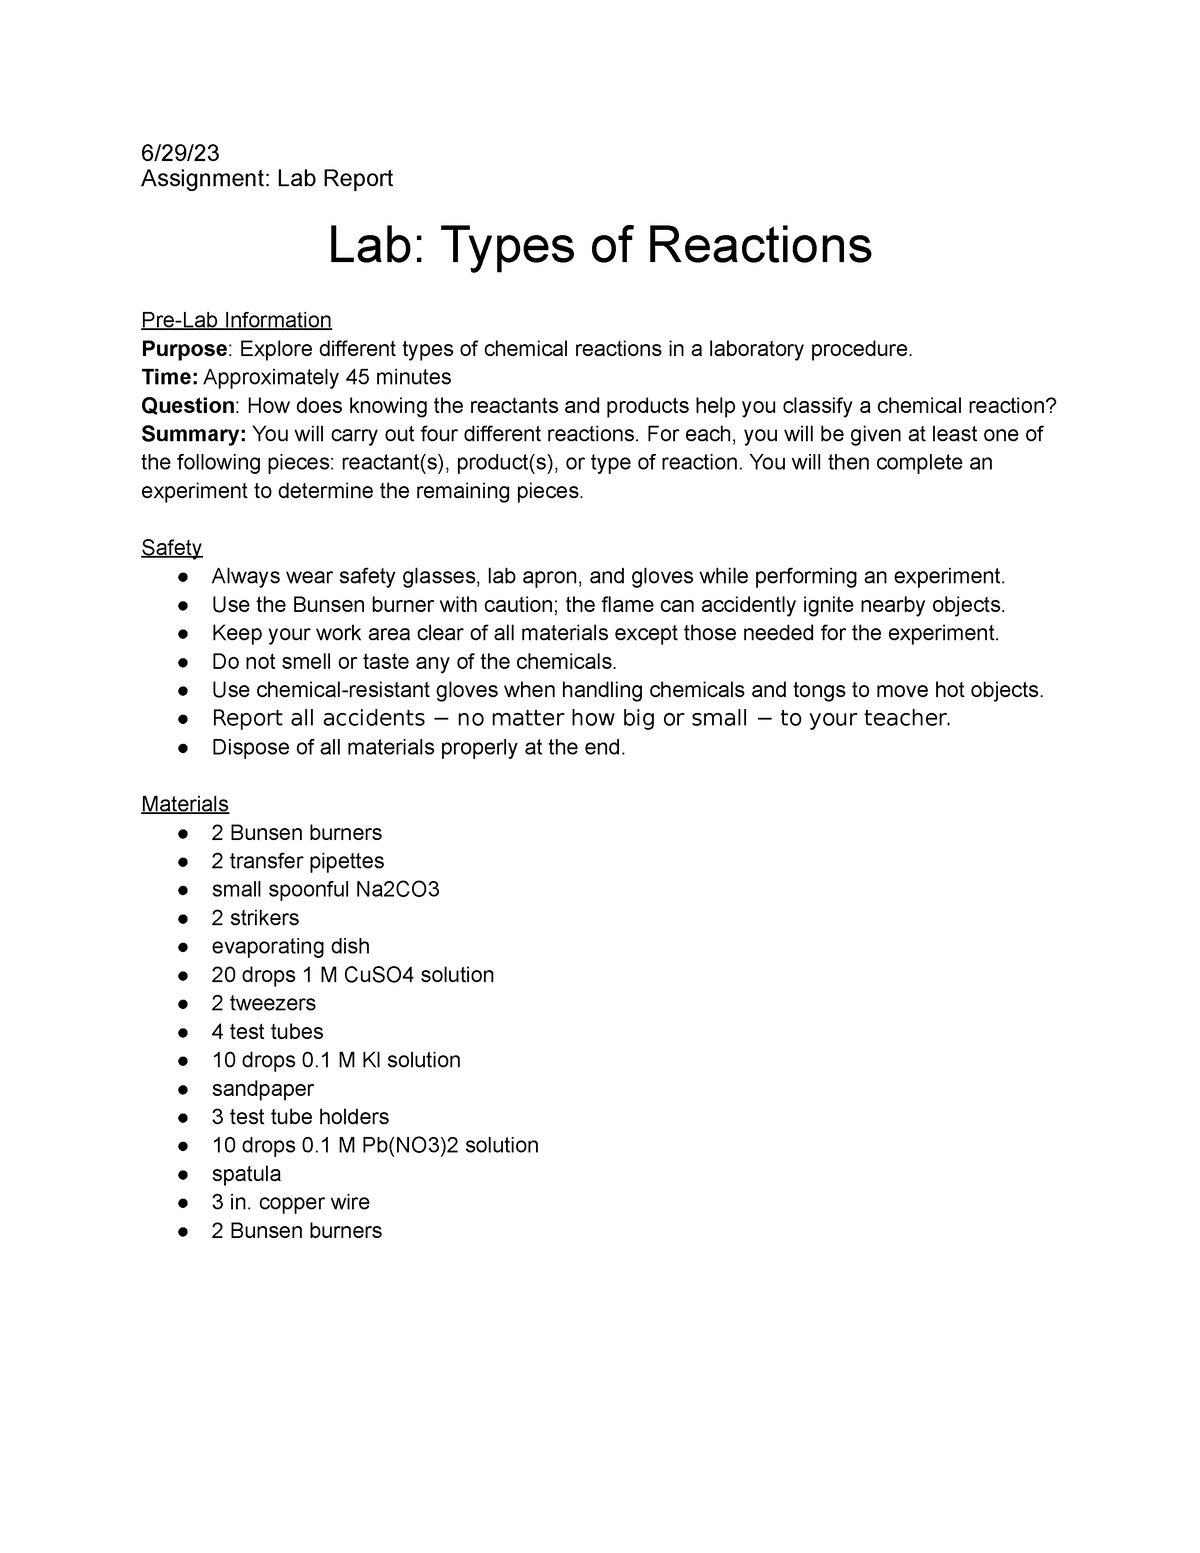 lab types of reactions assignment lab report